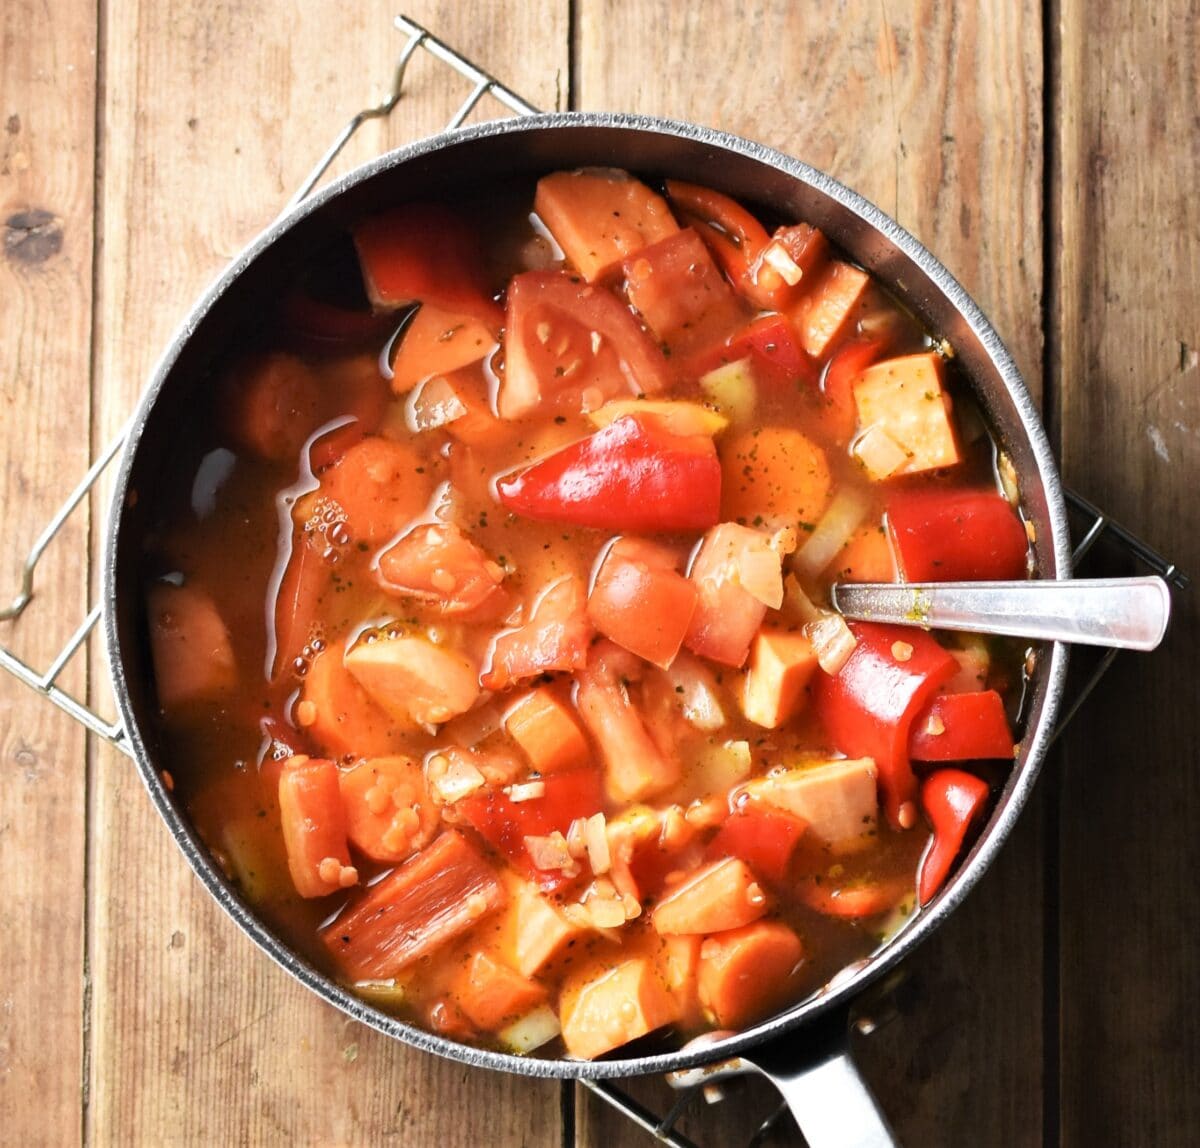 Chopped sweet potato, red pepper and carrot with stock in large pot with spoon.